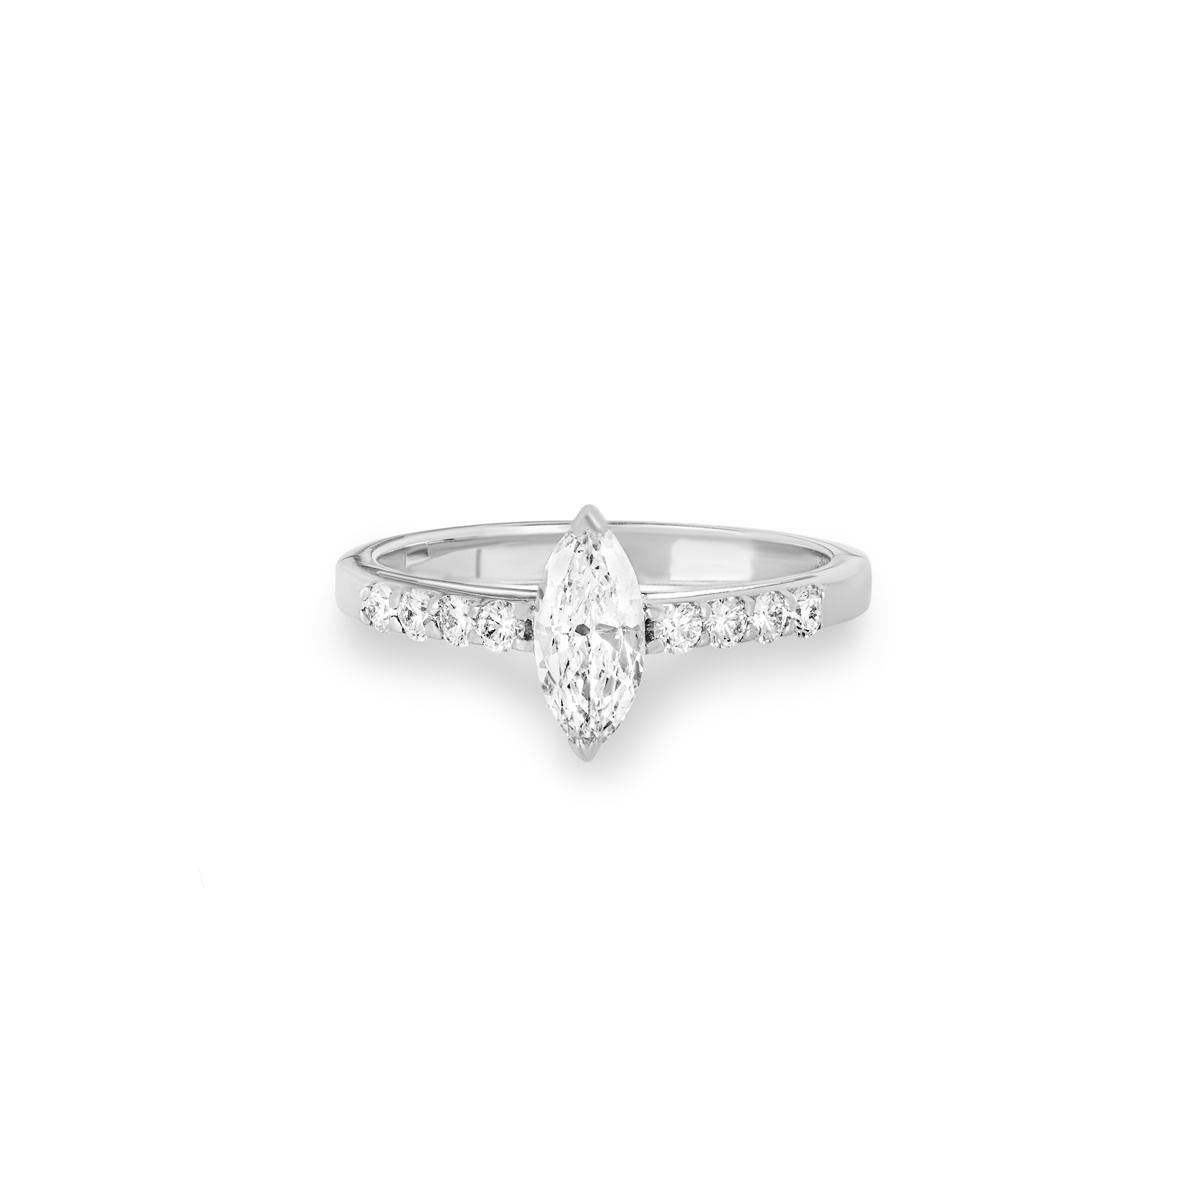 White Gold Marquise Cut Diamond Ring 0.53ct I/VS1 In New Condition For Sale In London, GB